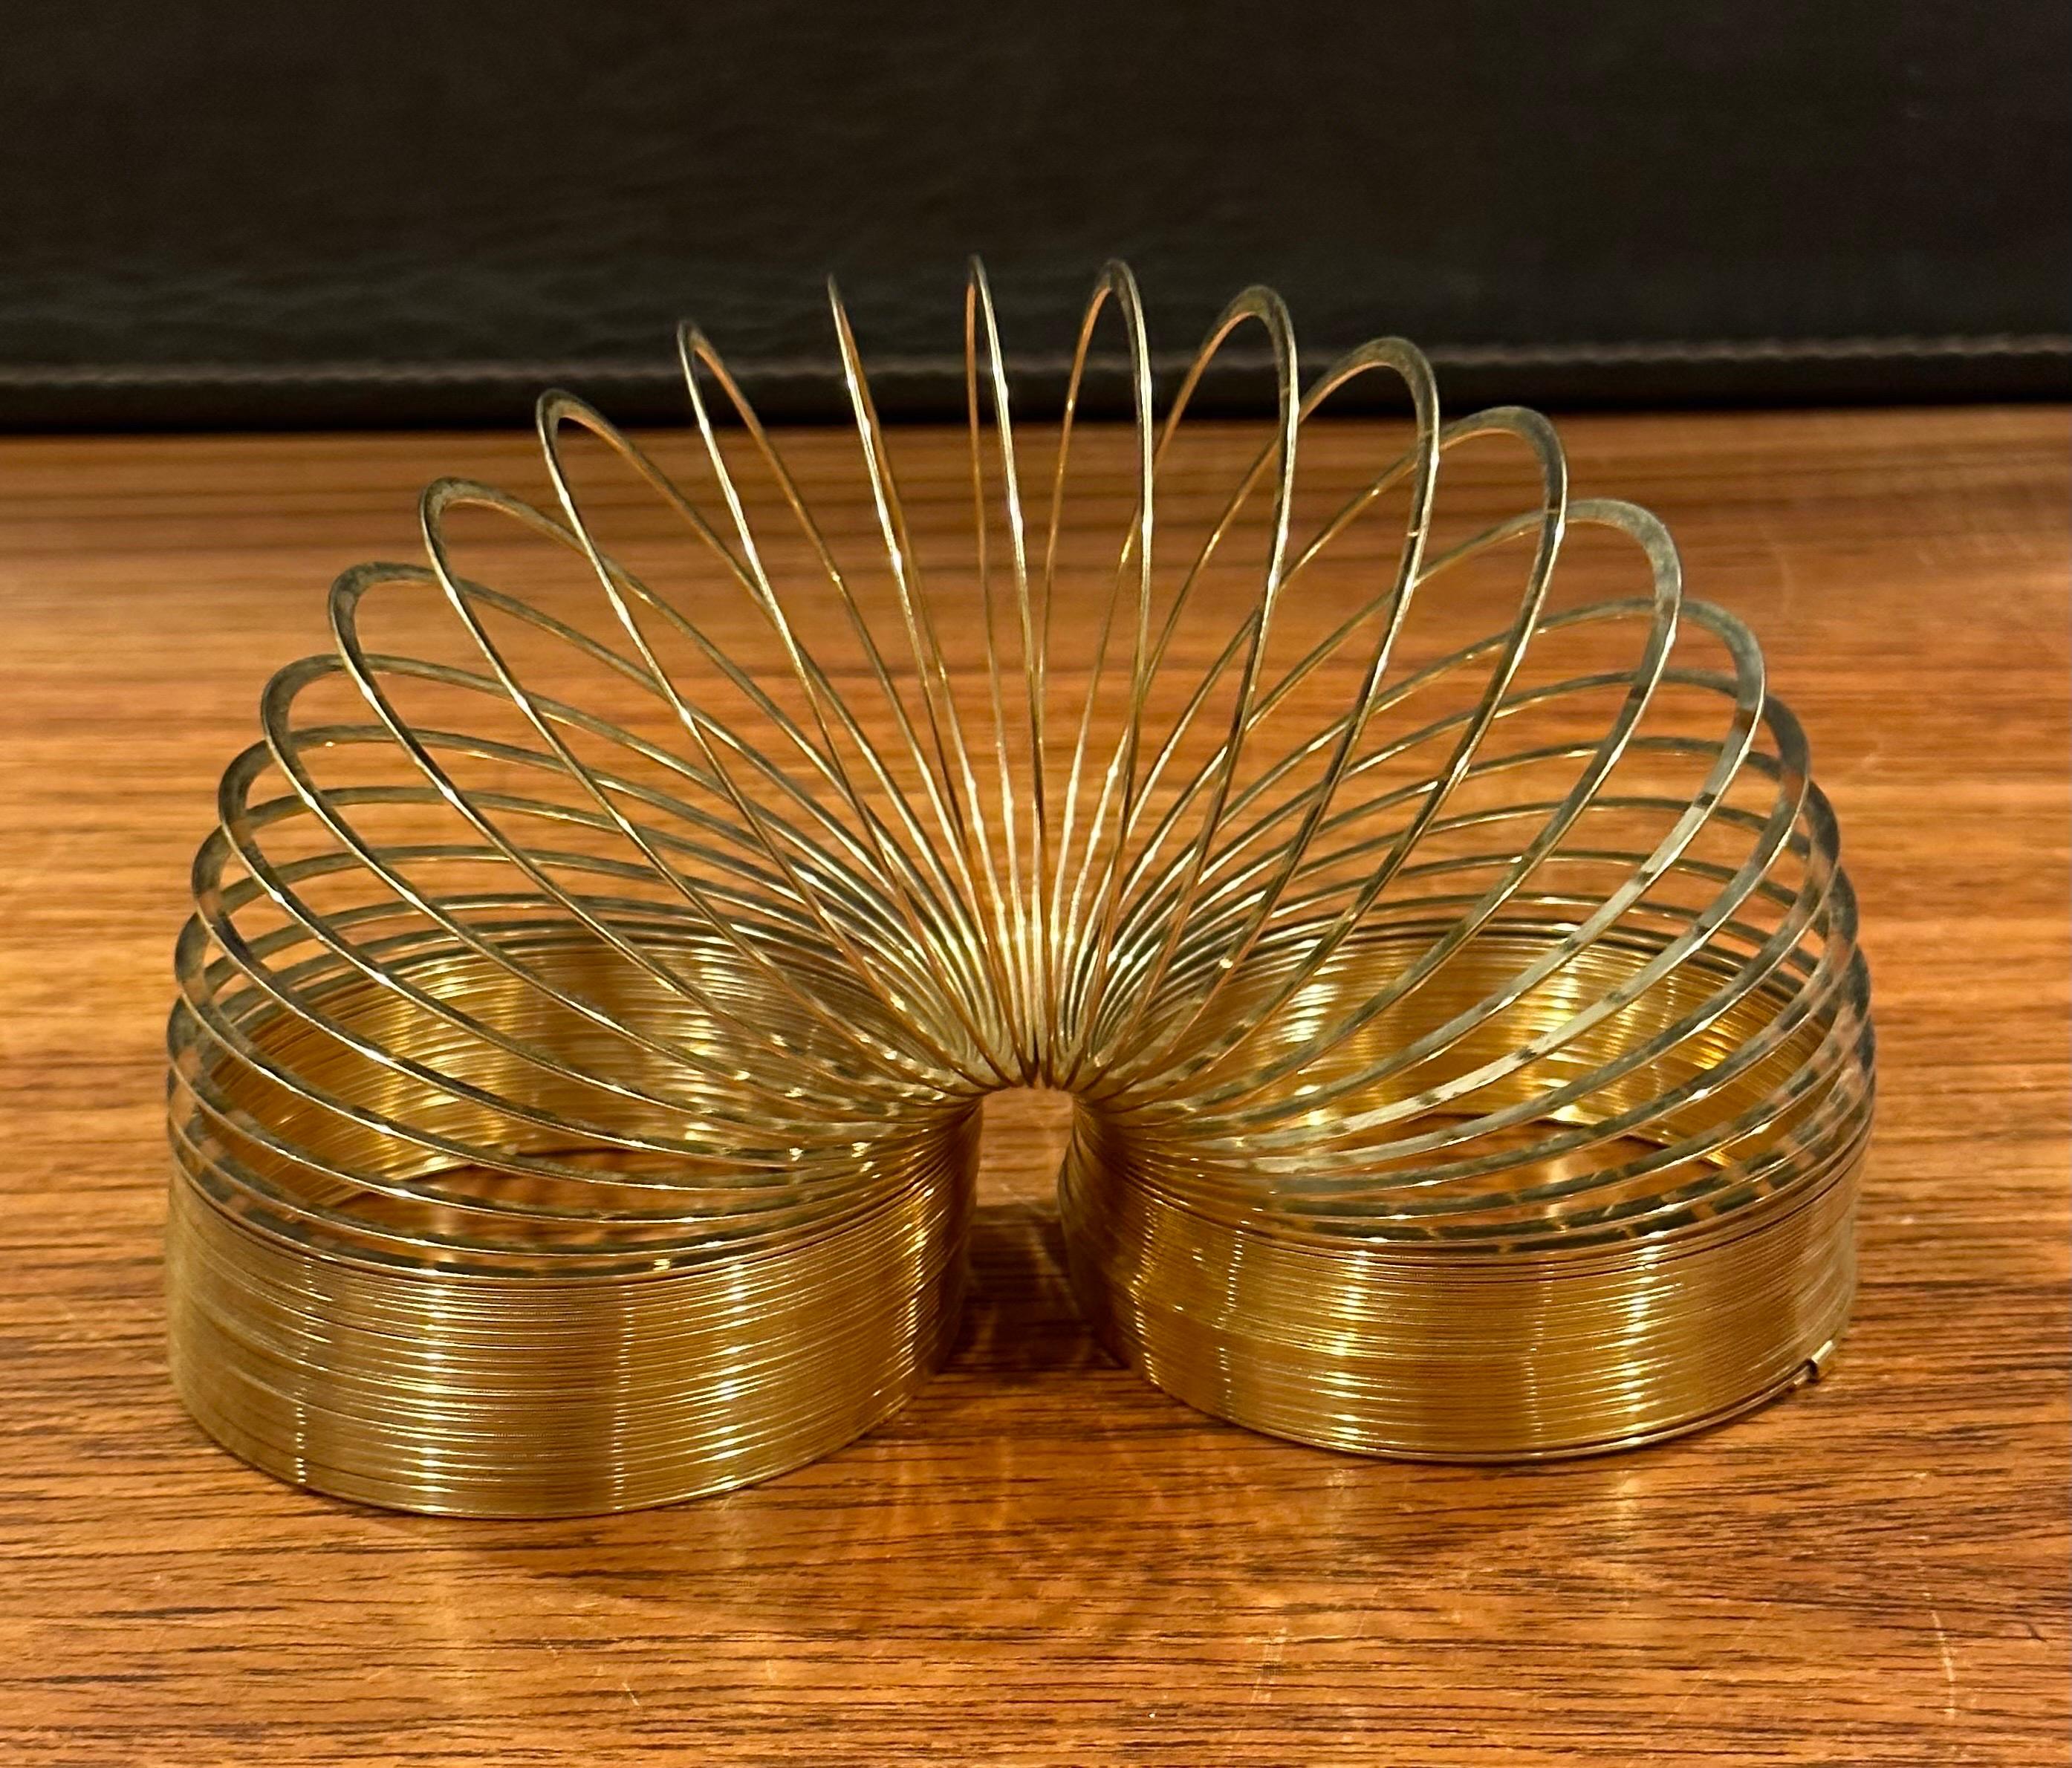 Gold Plate 50th Anniversary Gold-Plated Slinky Toy in Wood Box For Sale